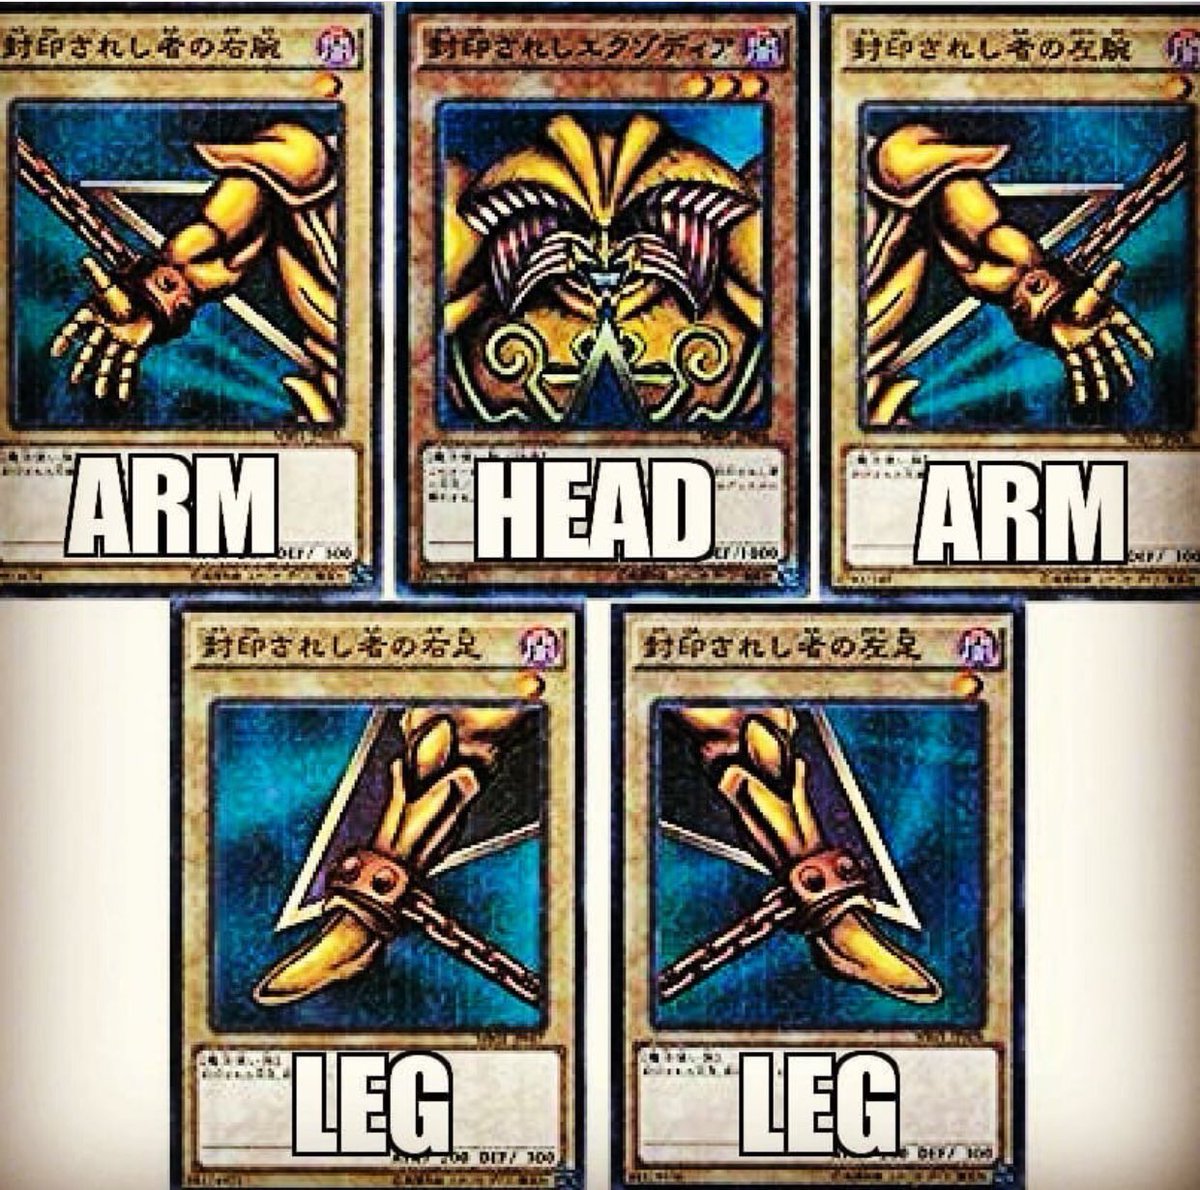 These are the 5 cards that create the Forbidden One, who is one of the most ancient and powerful Egyptian cards, as explained in the animation Yu-Gi-Oh. It’s no coincidence his formation is made to mimic the grand design of our creation that is A.L.L.A.H.